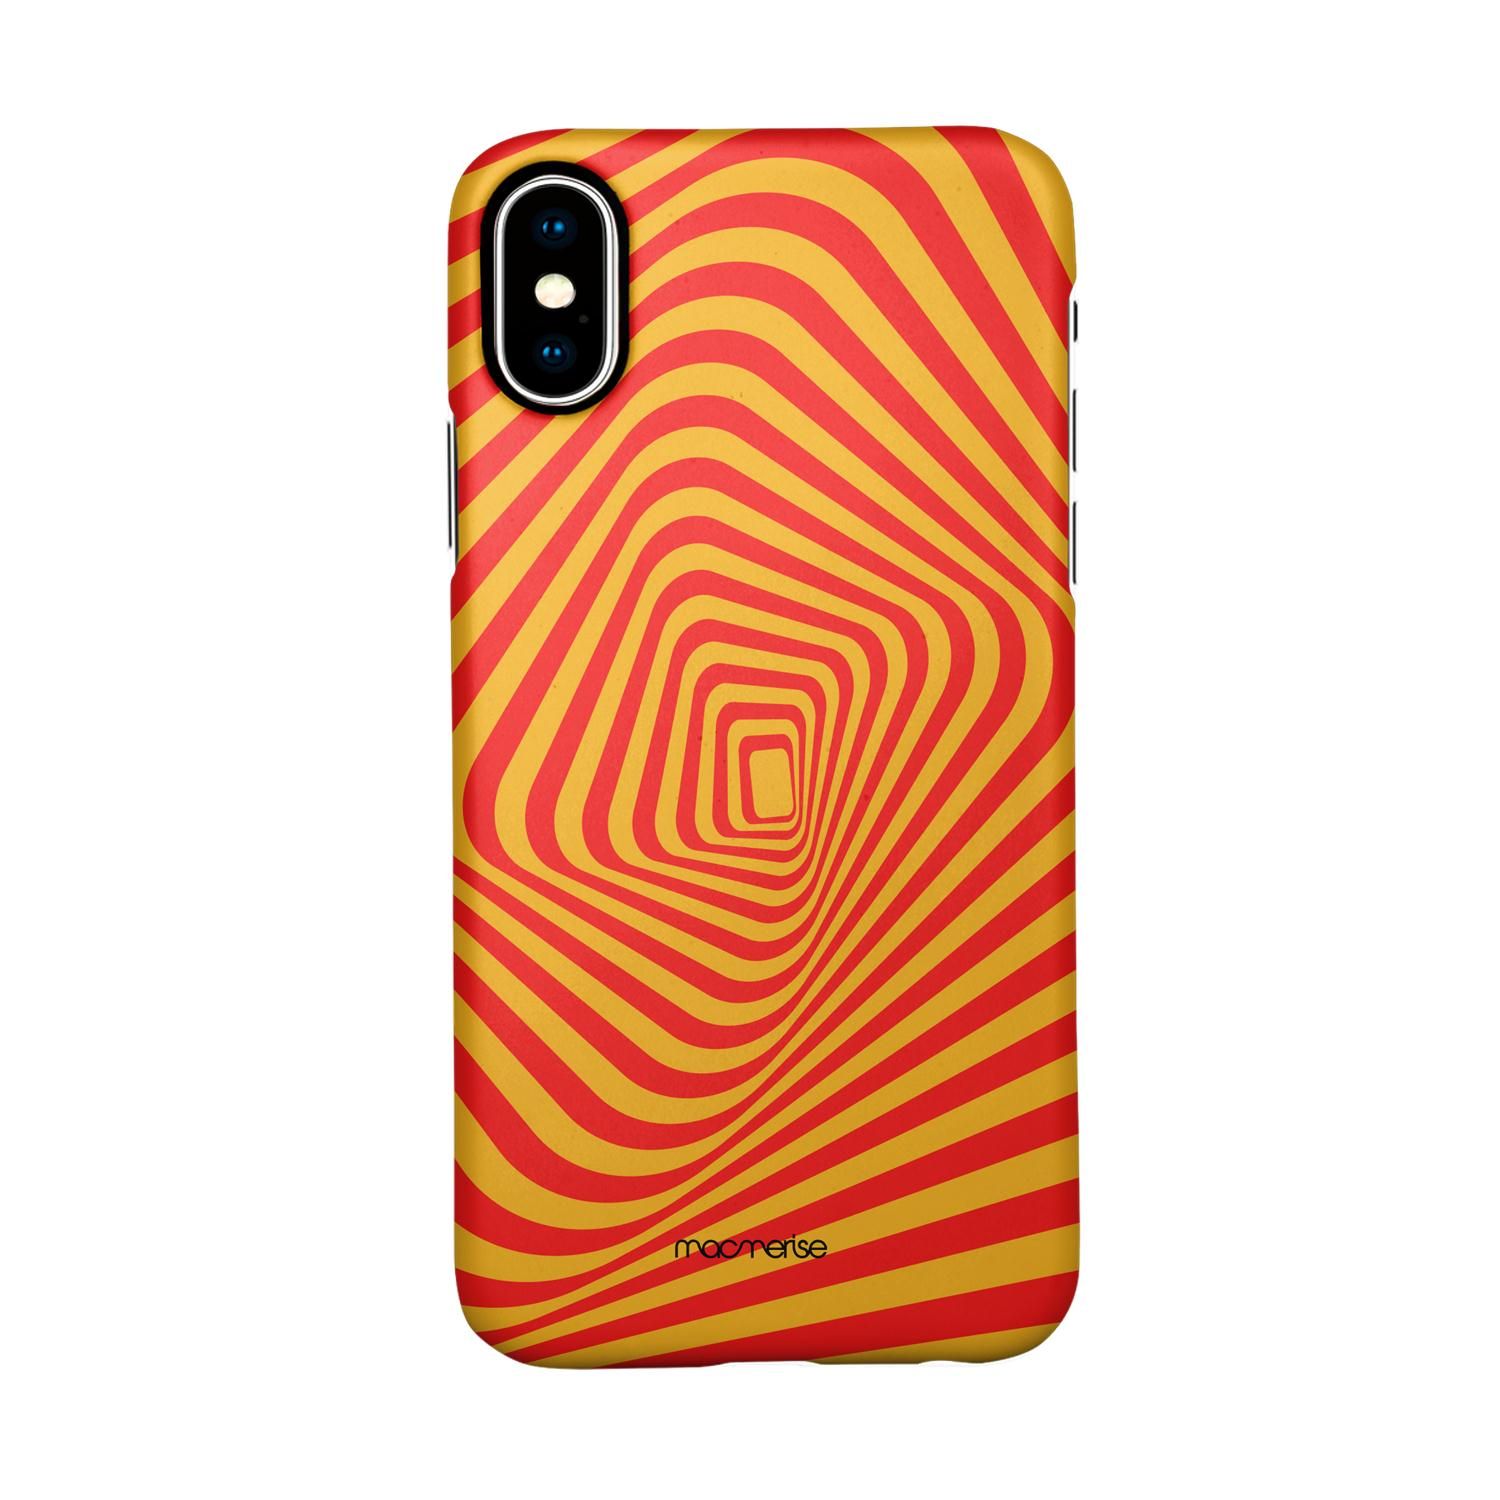 Physiollusion - Sleek Case for iPhone XS